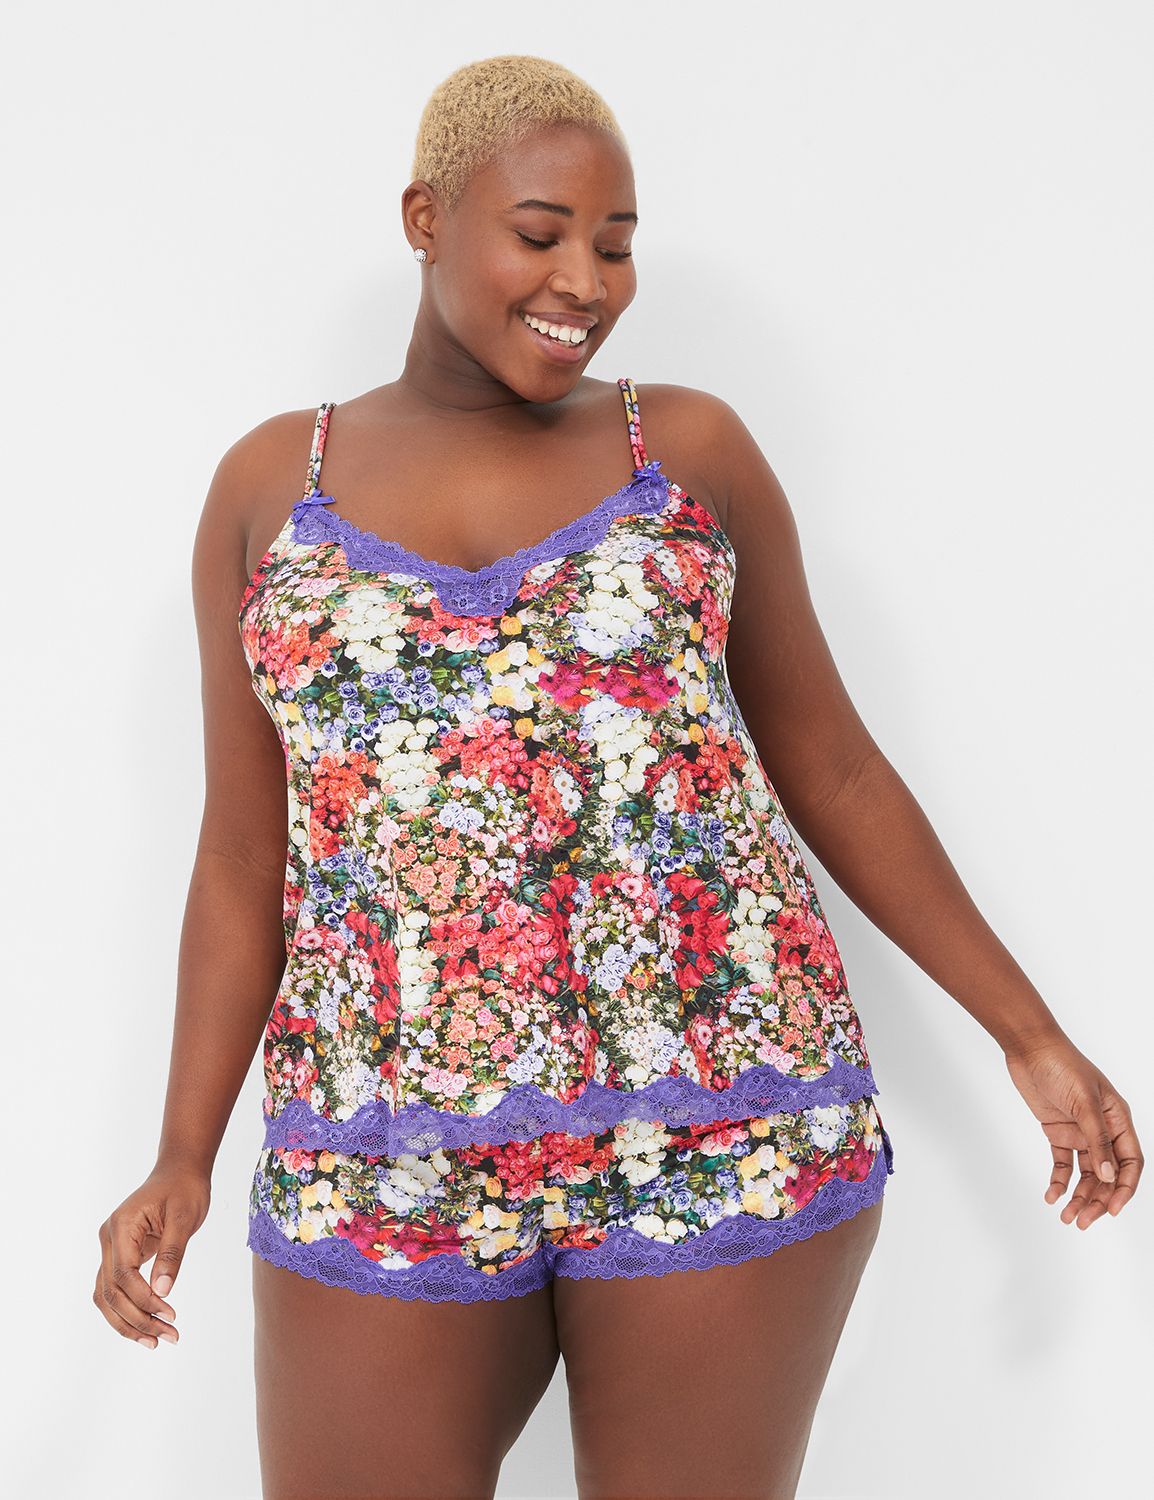 Plus Size - Full-Coverage Balconette Lightly Lined Exploded Floral